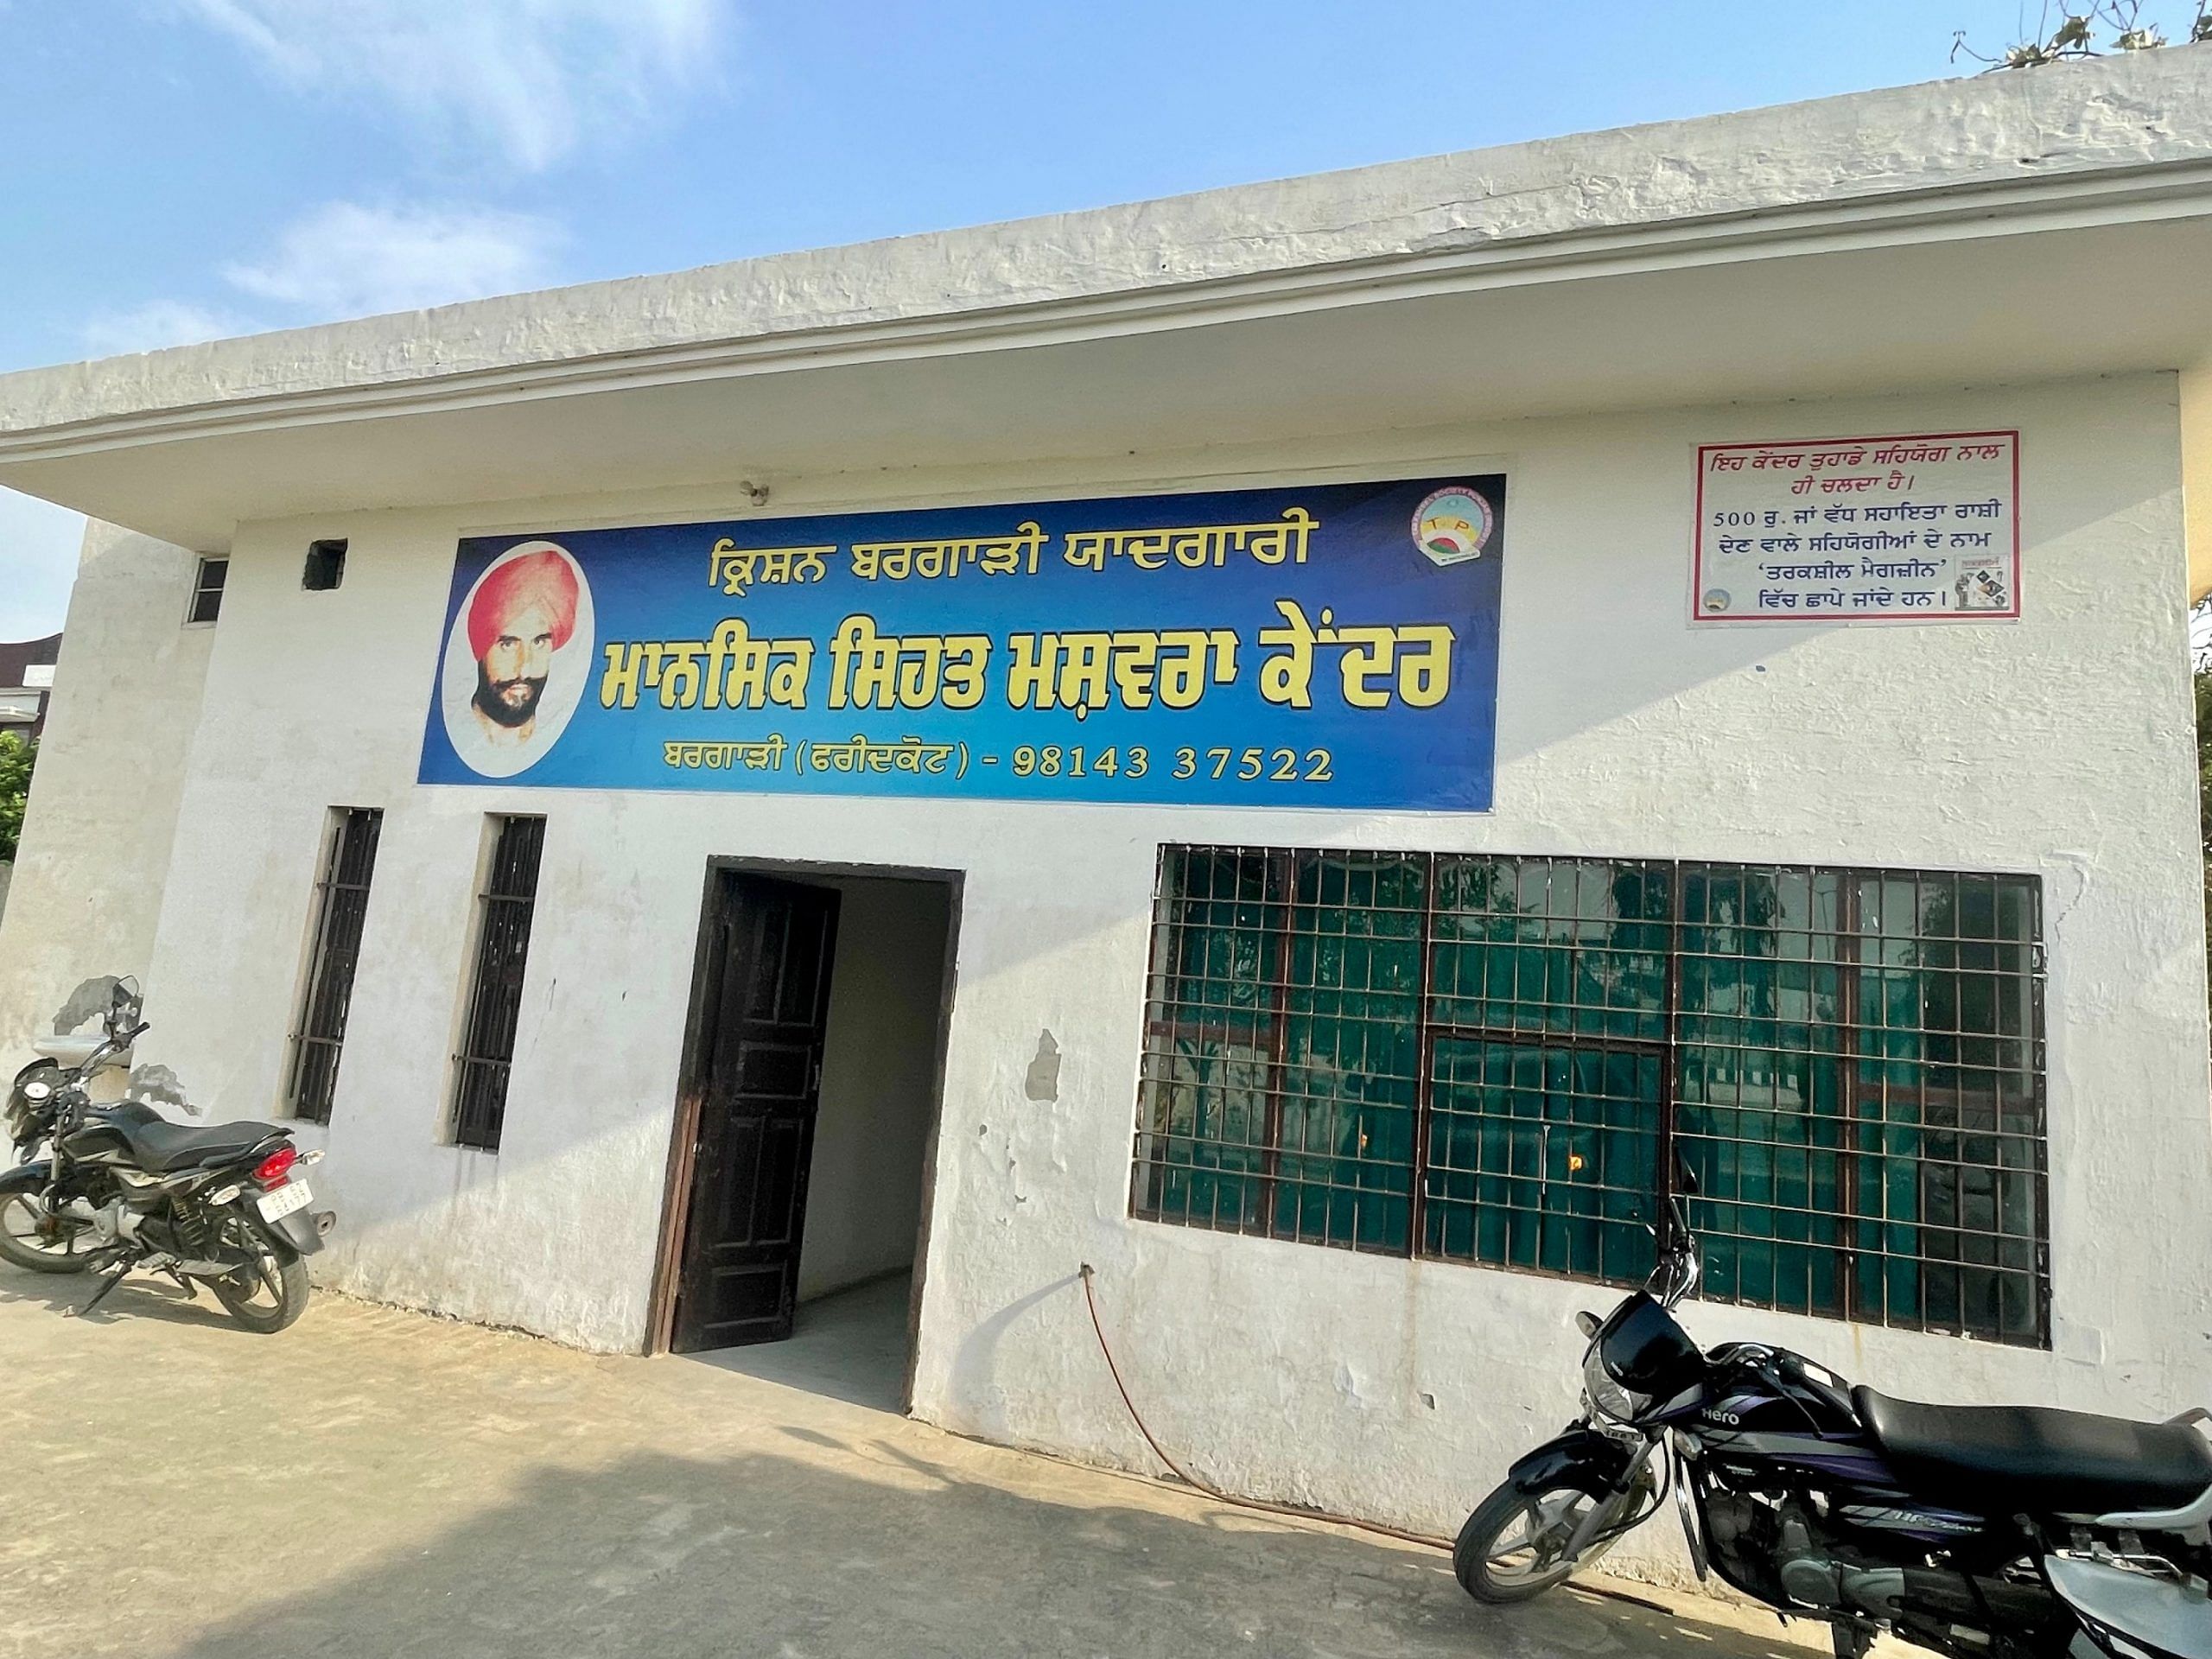 BargariClinic: The Tarksheel society's weekend 'clinic', an informal center housed next to the highway in Bargari, Faridkot. The clinic treats people with hallucinations, mental illnesses and other problems often attributed to 'bhoot-pret' or being 'possessed' | Sabah Gurmat, ThePrint